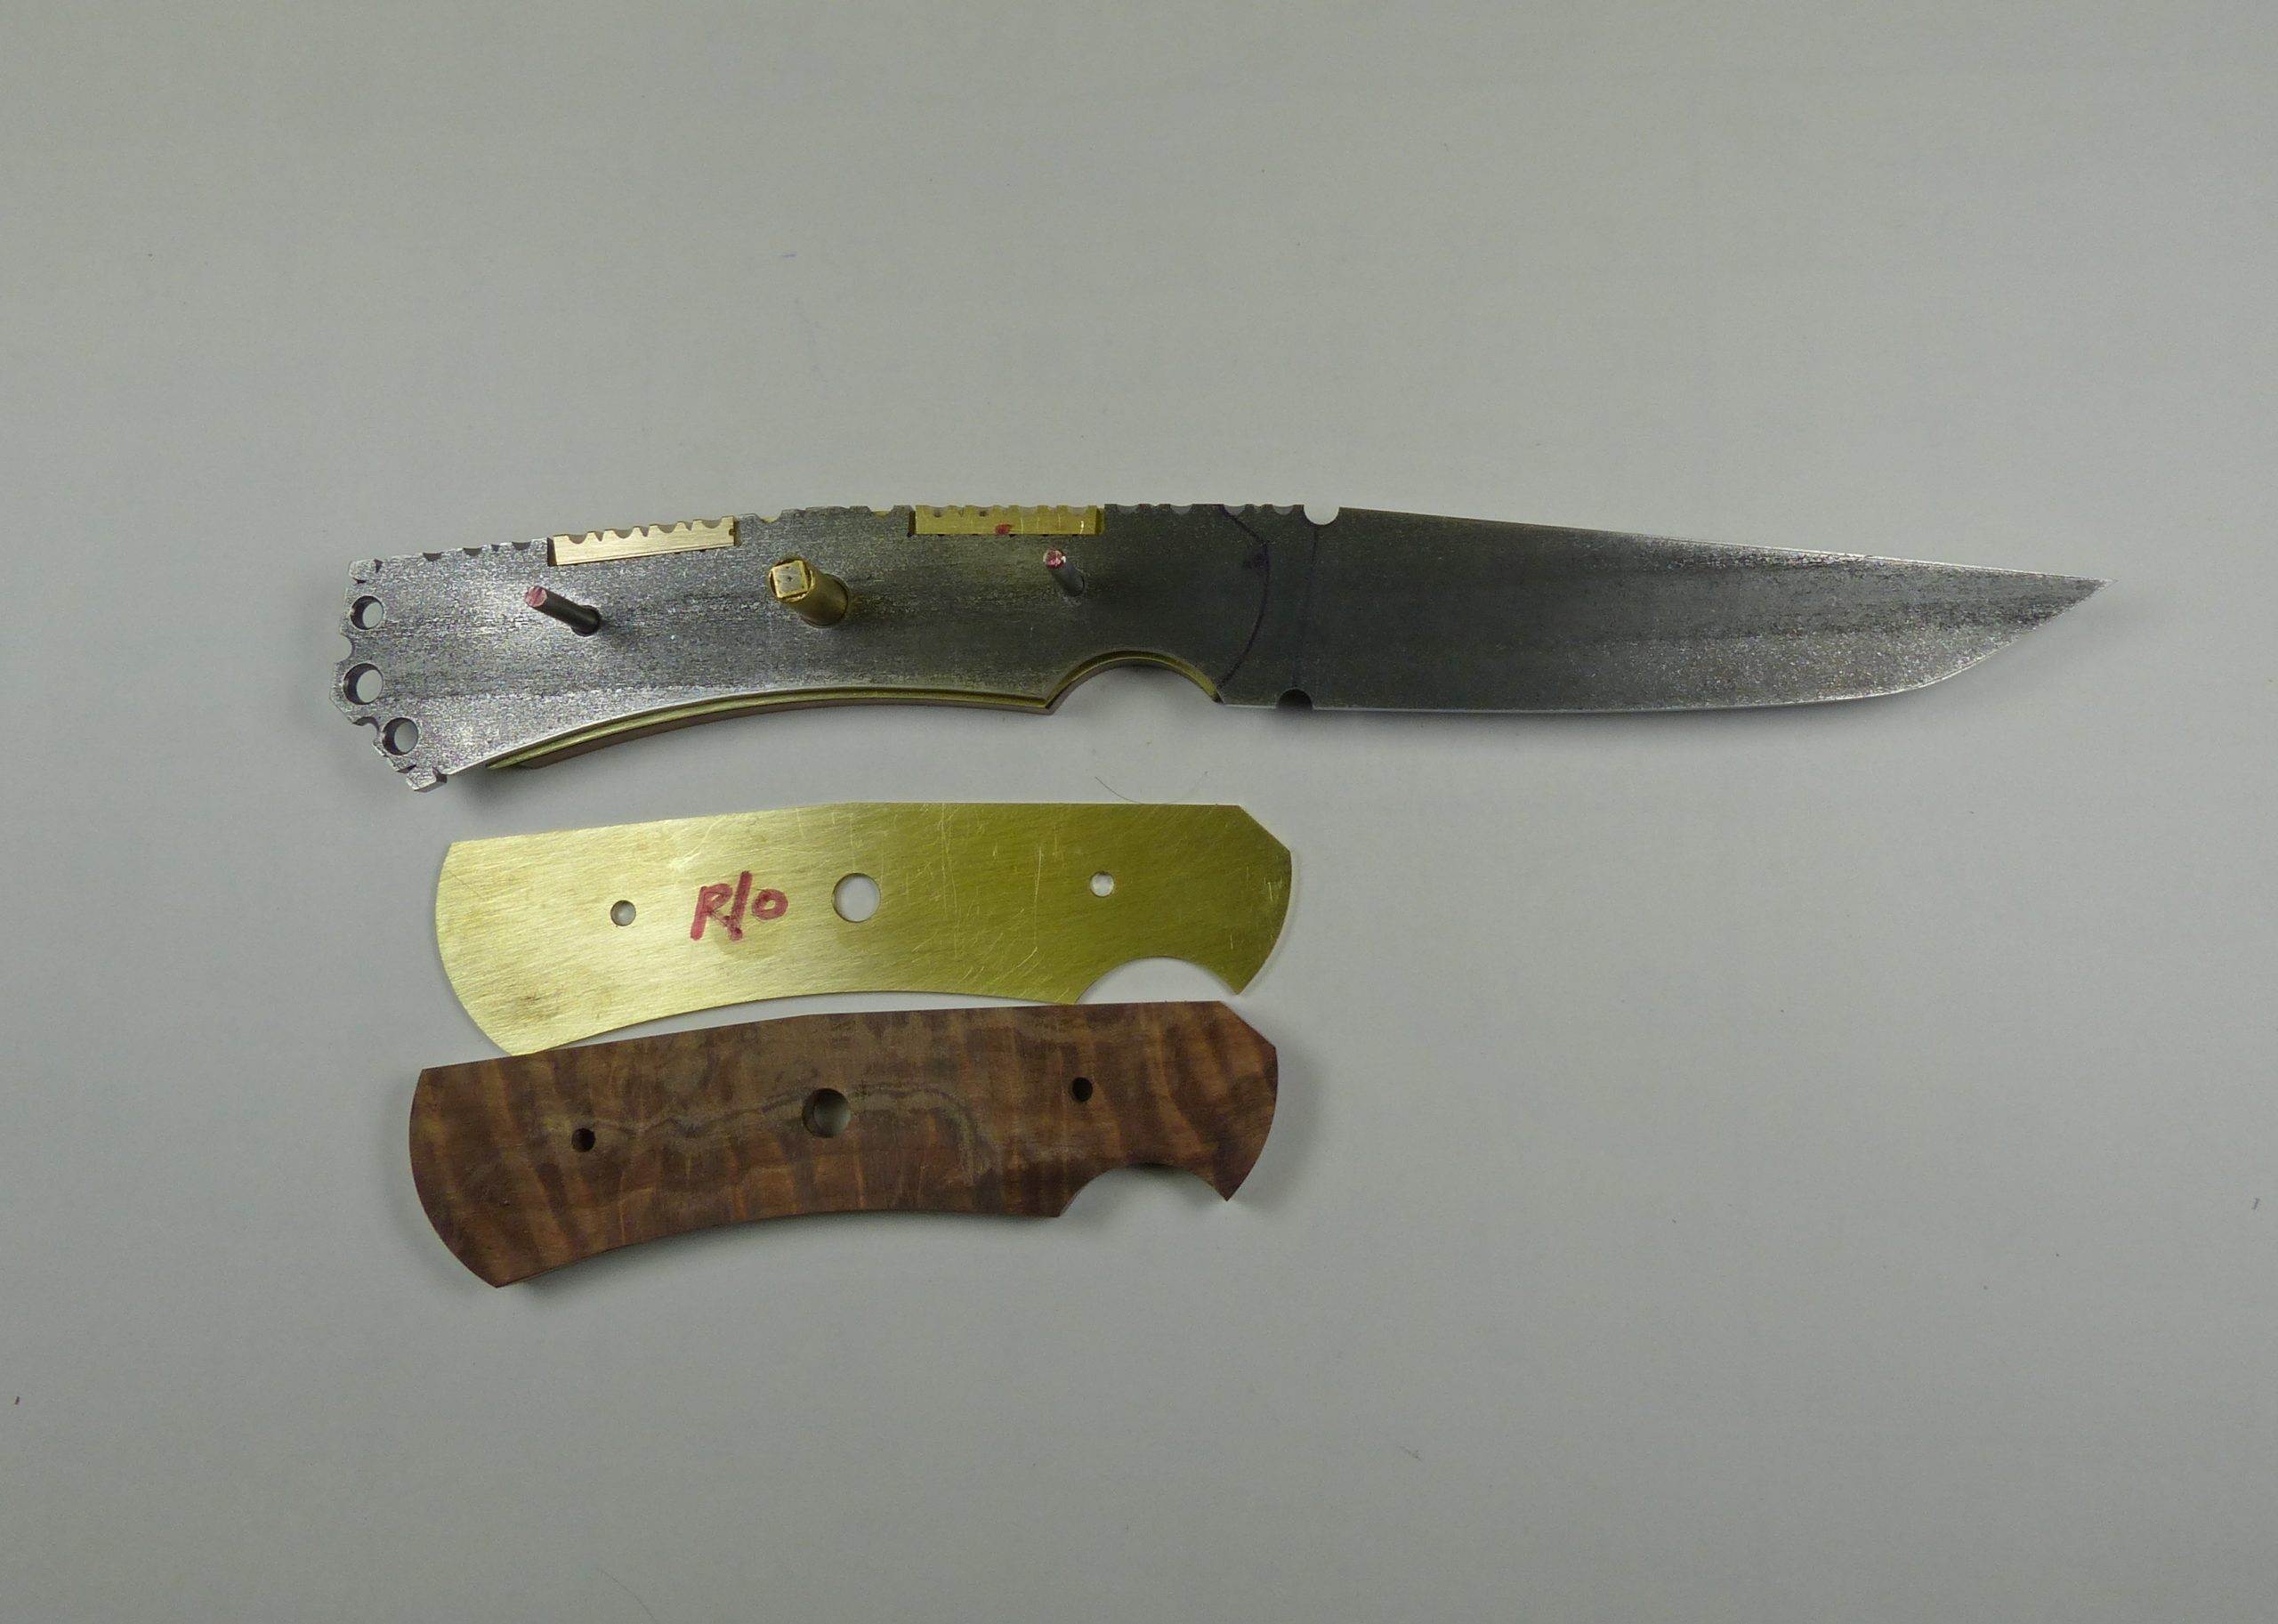 Knife blade with brass and wood handle pieces